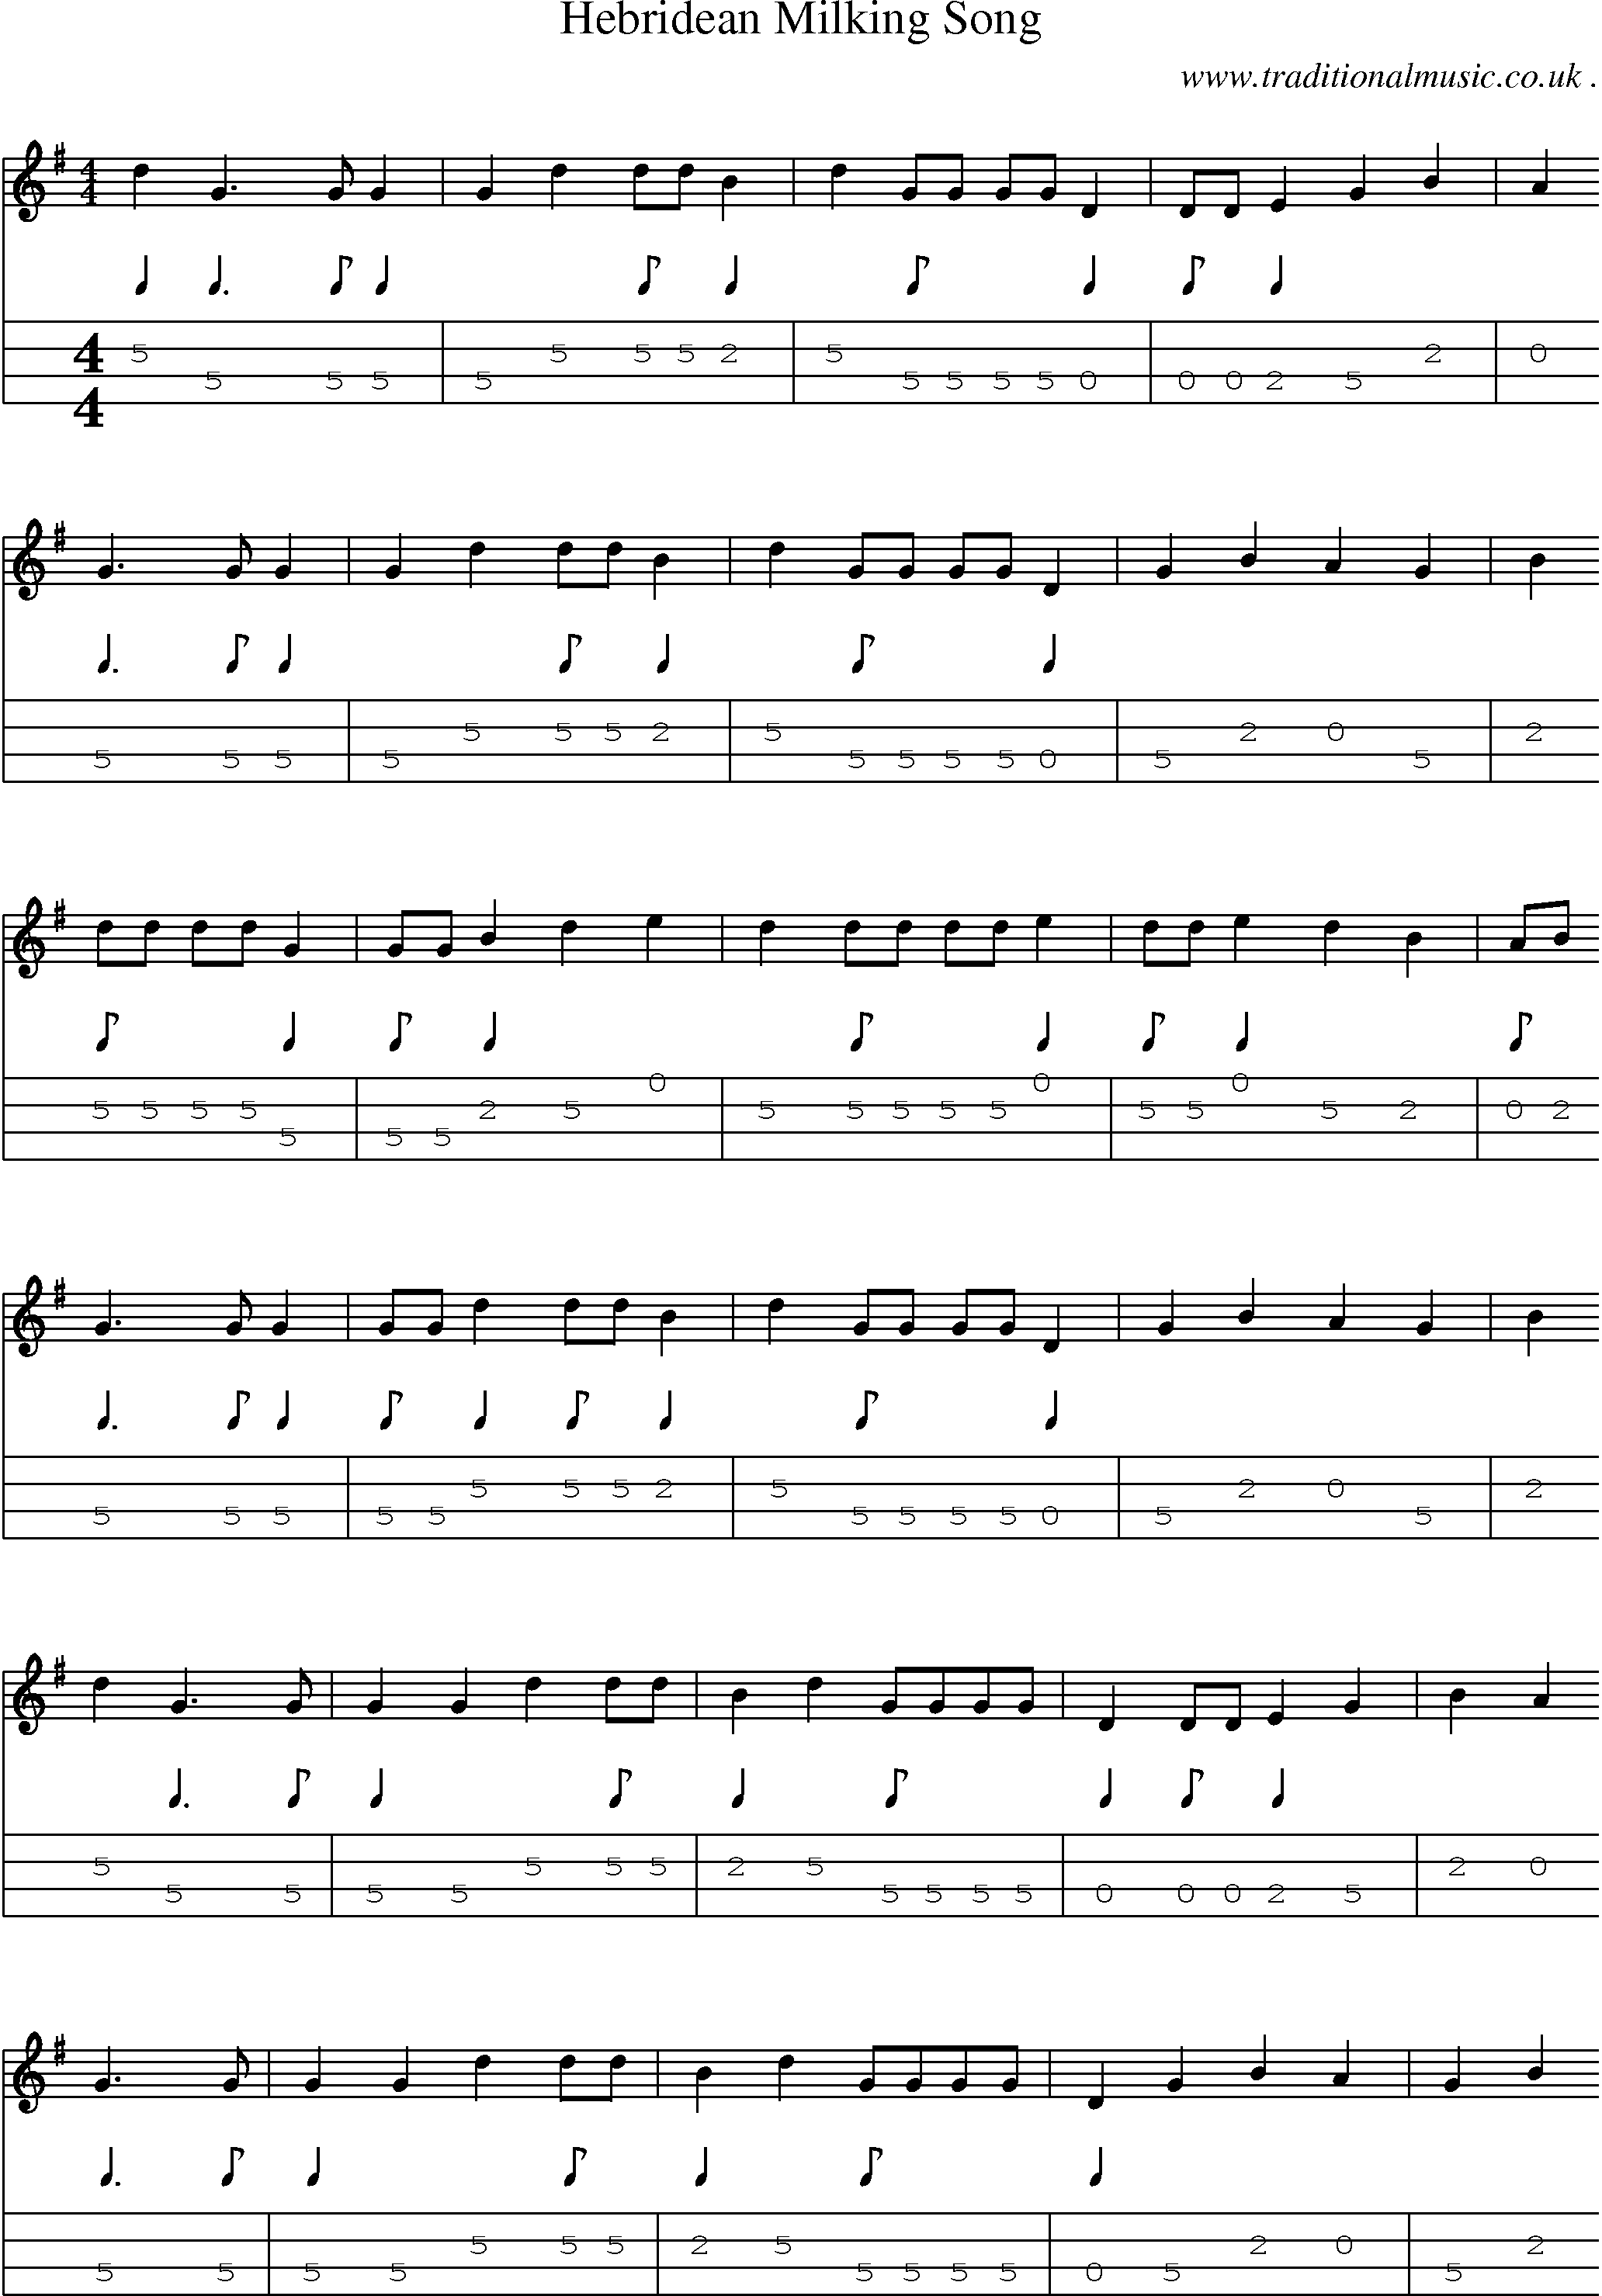 Sheet-Music and Mandolin Tabs for Hebridean Milking Song